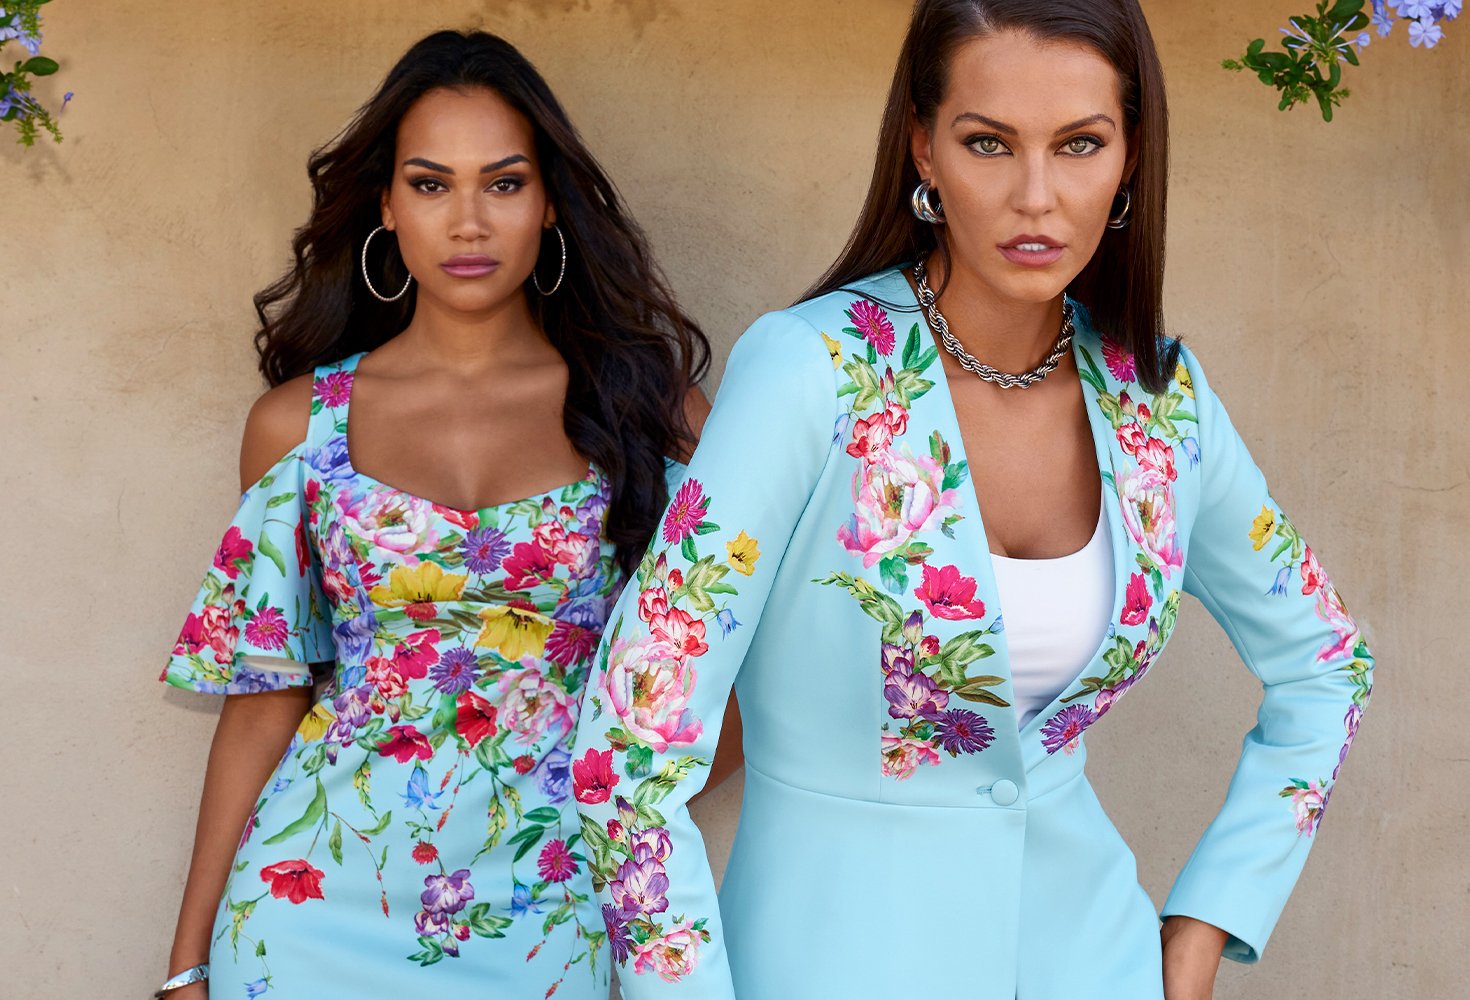 First models wearing a light blue and floral cold shoulder dress while the other model wears a matching blazer.